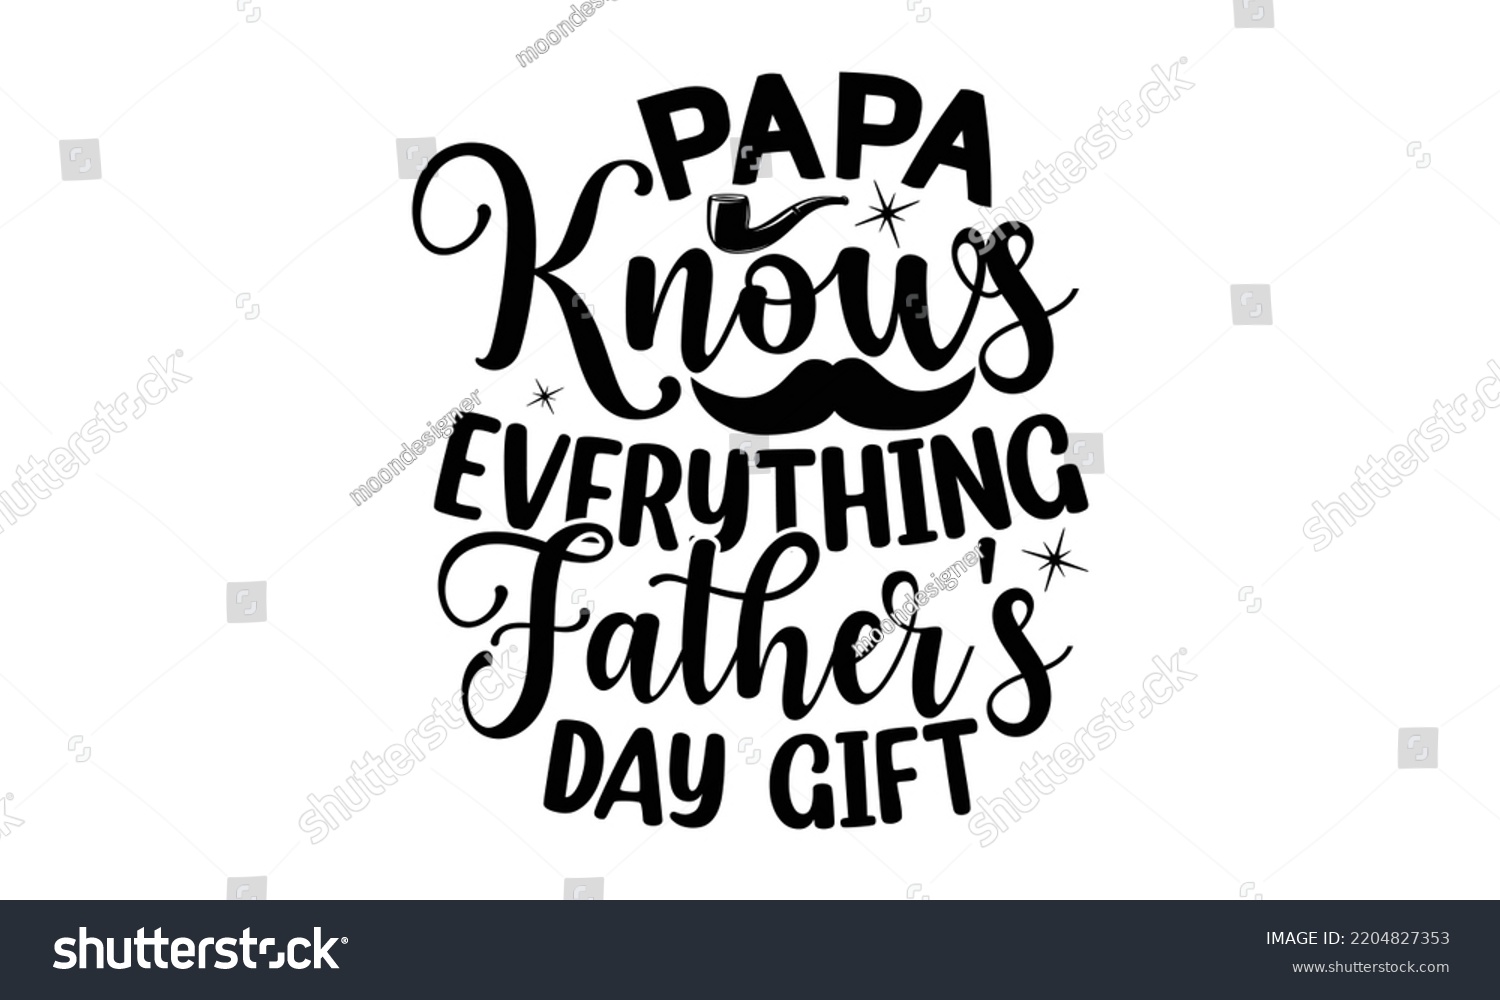 SVG of Papa Knows Everthing Father's Day Gift - father Typography t-shirt design, Hand drawn lettering father's quote in modern calligraphy style, Handwritten vector sign, SVG, EPS 10 svg